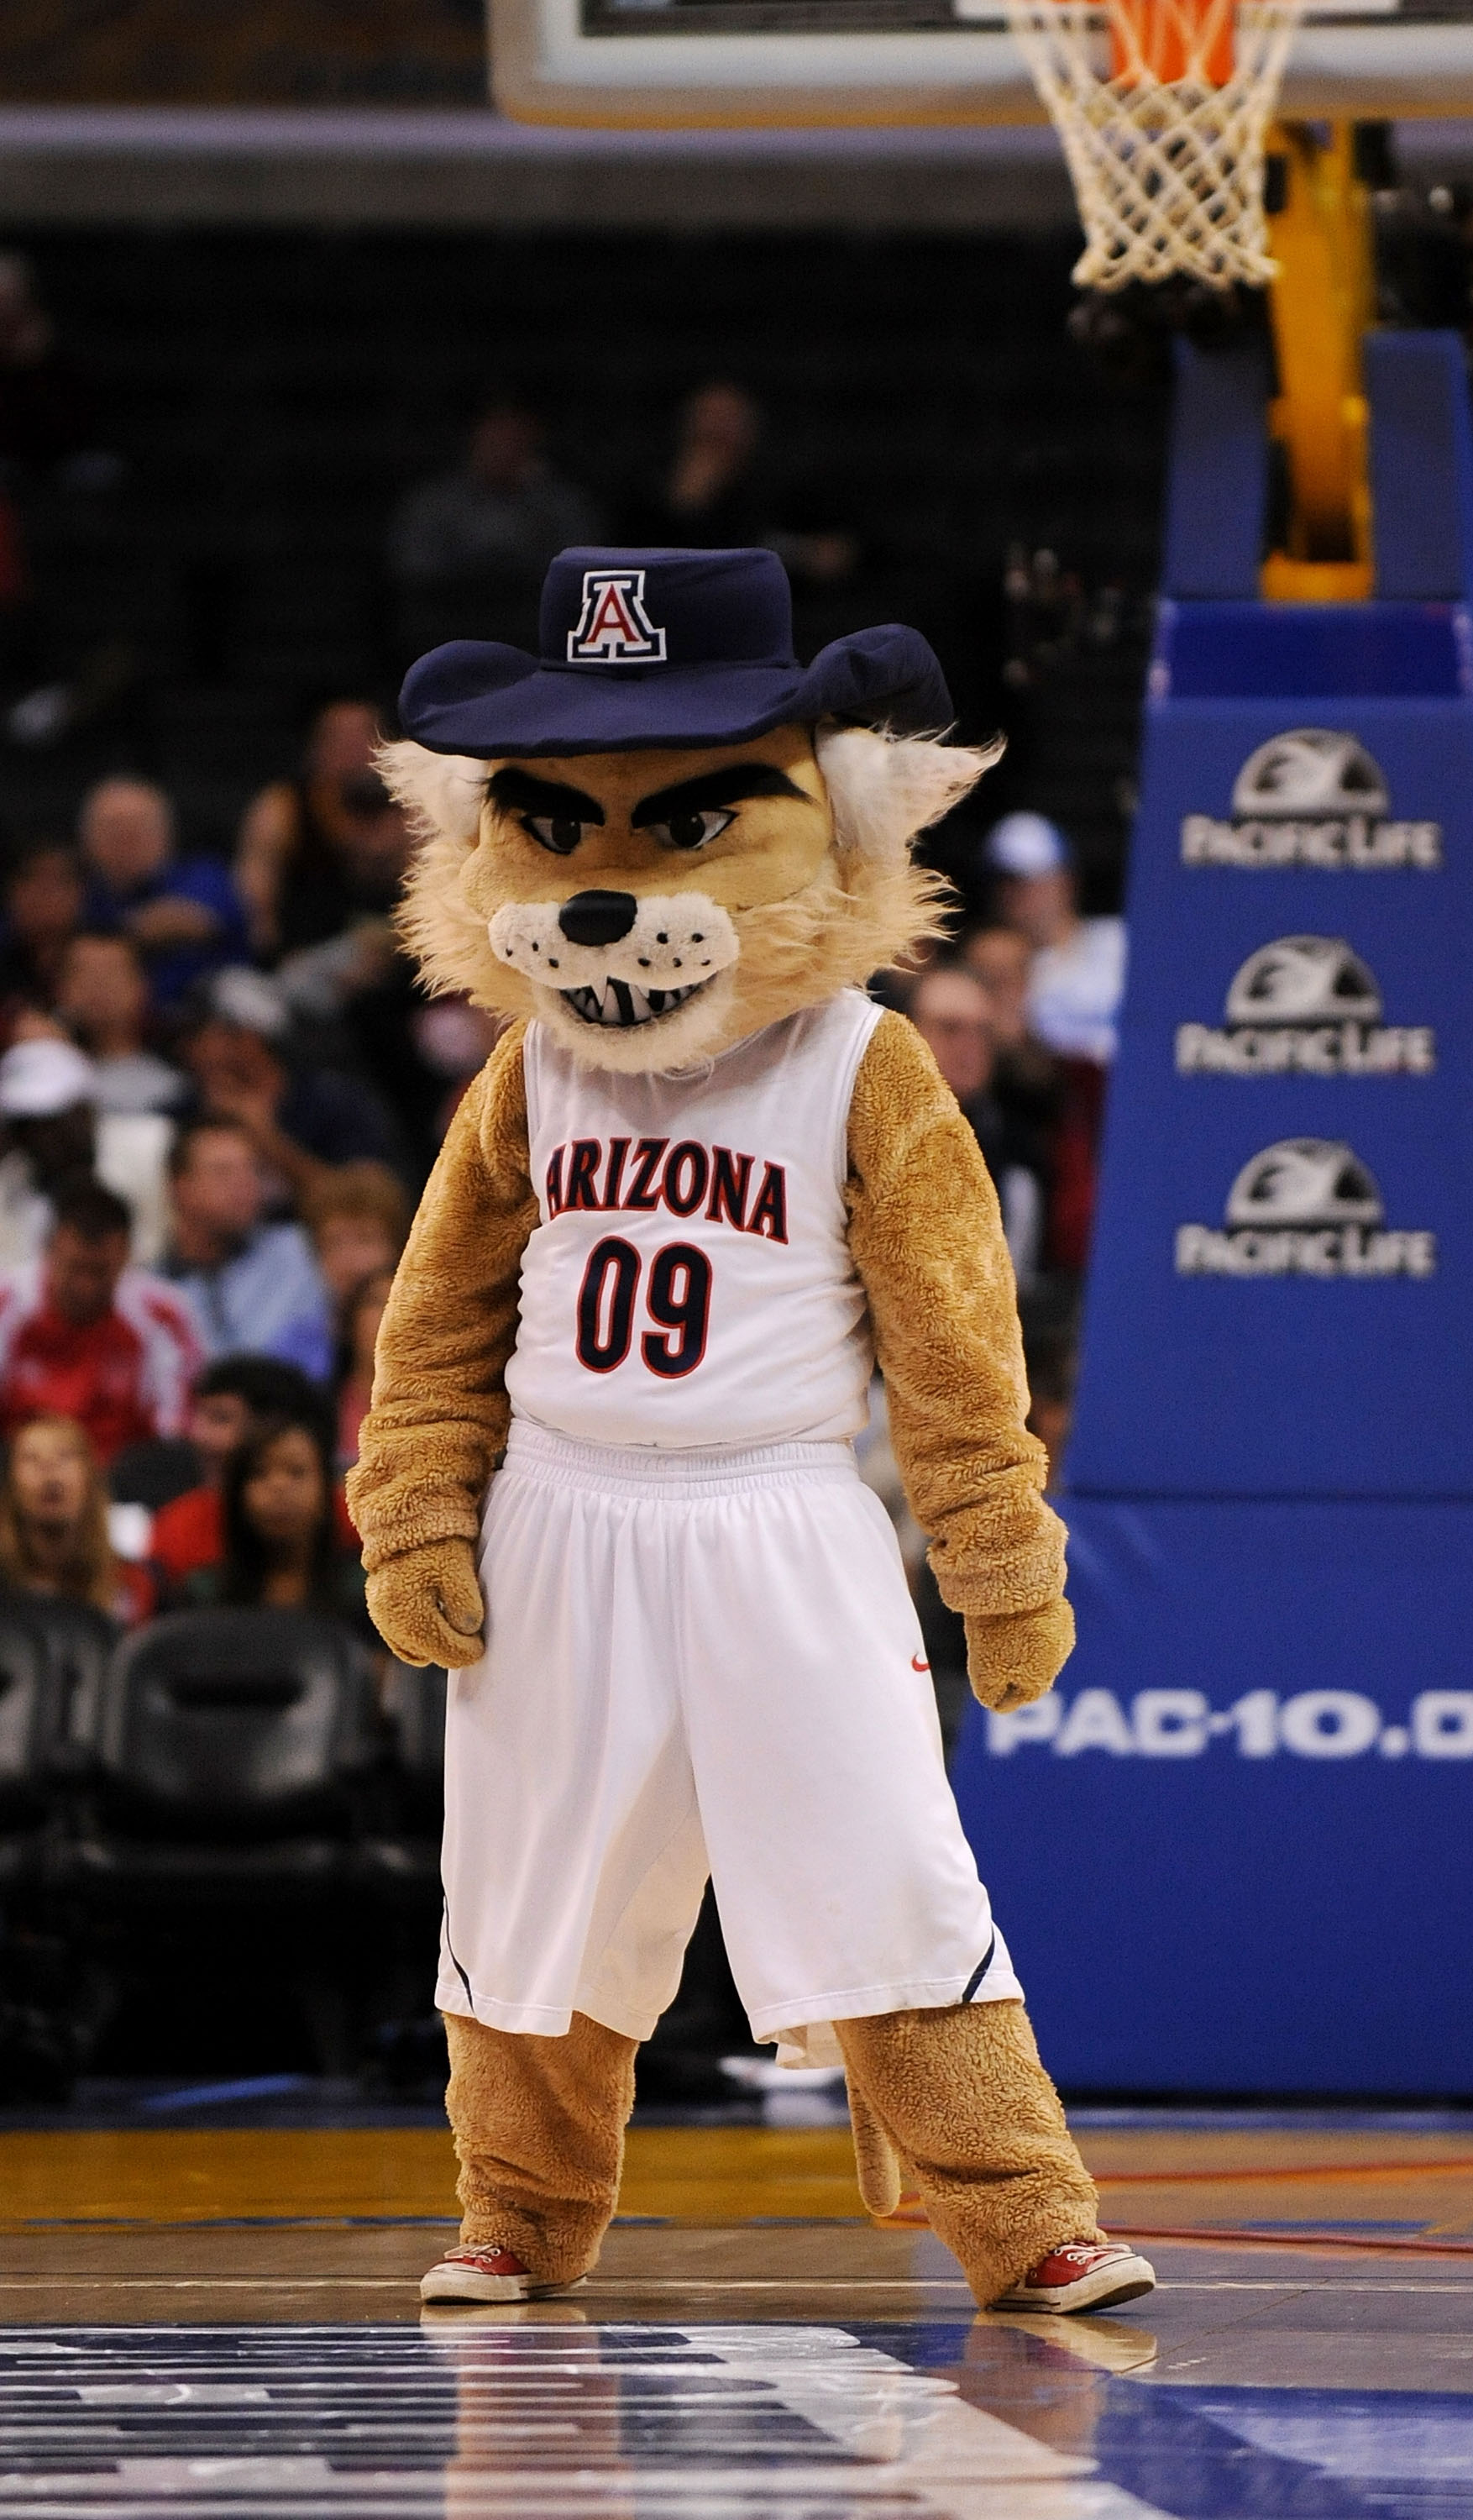 LOS ANGELES, CA - MARCH 12:  Arizona Wildcats mascot Wilbur T. Wildcat during the Pacific Life Pac-10 Men's Basketball Tournament at the Staples Center on March 12, 2009 in Los Angeles, California.  (Photo by Harry How/Getty Images)